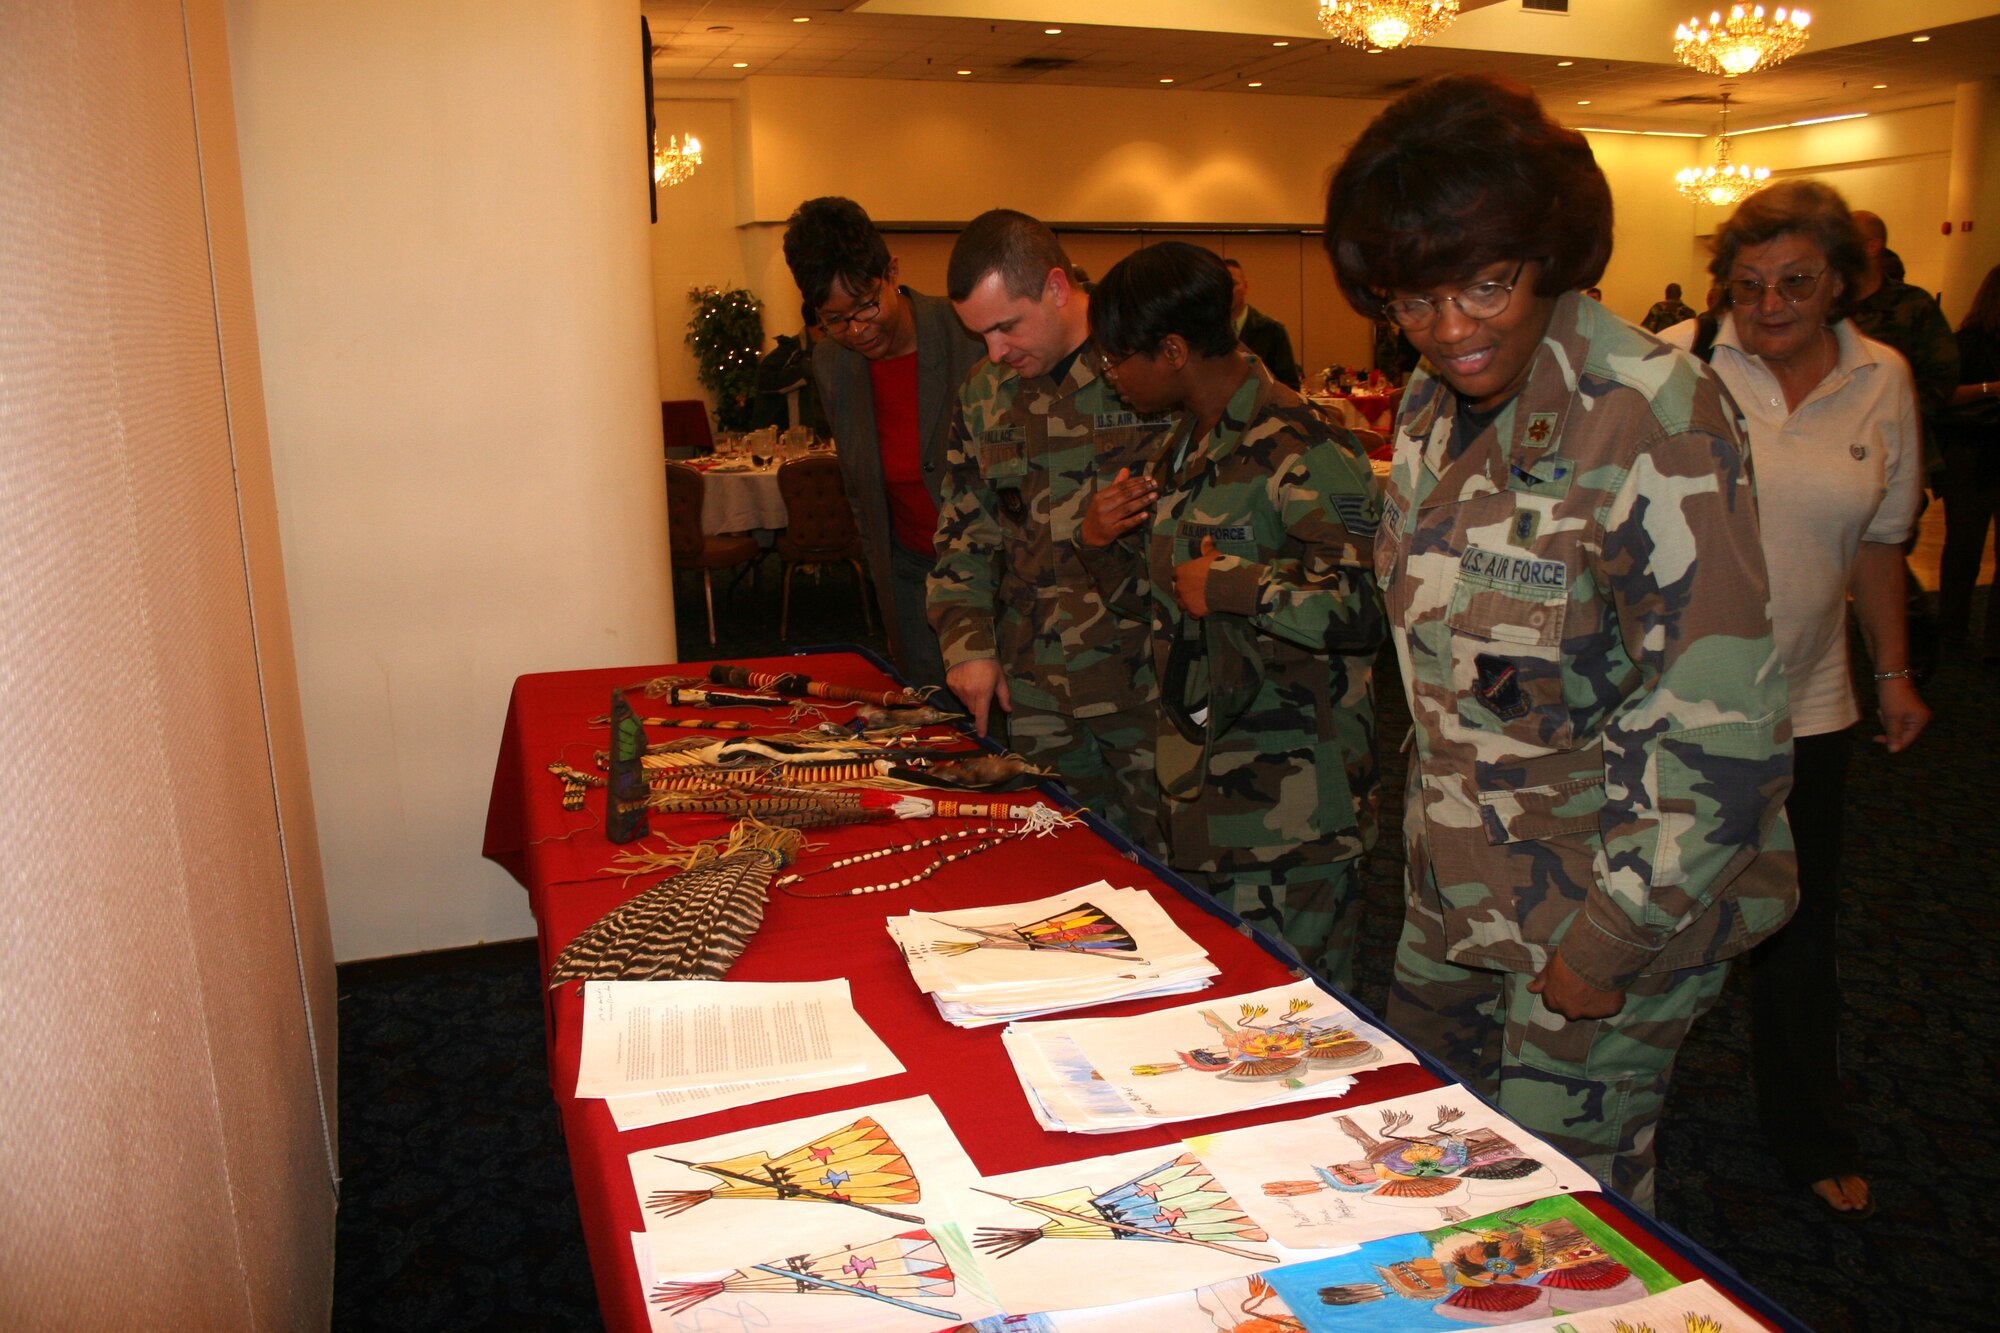 Base members look at different Native American displays at the Consolidated Club here Nov. 28, after the Native American Heritage Luncheon. More than 60 people attended the luncheon. Airman 1st Class Amber Kitto, 39th Logistics Readiness Squadron HAZMAT supply technician, gave auidence members an insight into Native American culture from dream catchers to the eagle feathers. (U.S. Air Force photo by Senior Airman Patrice Clarke)